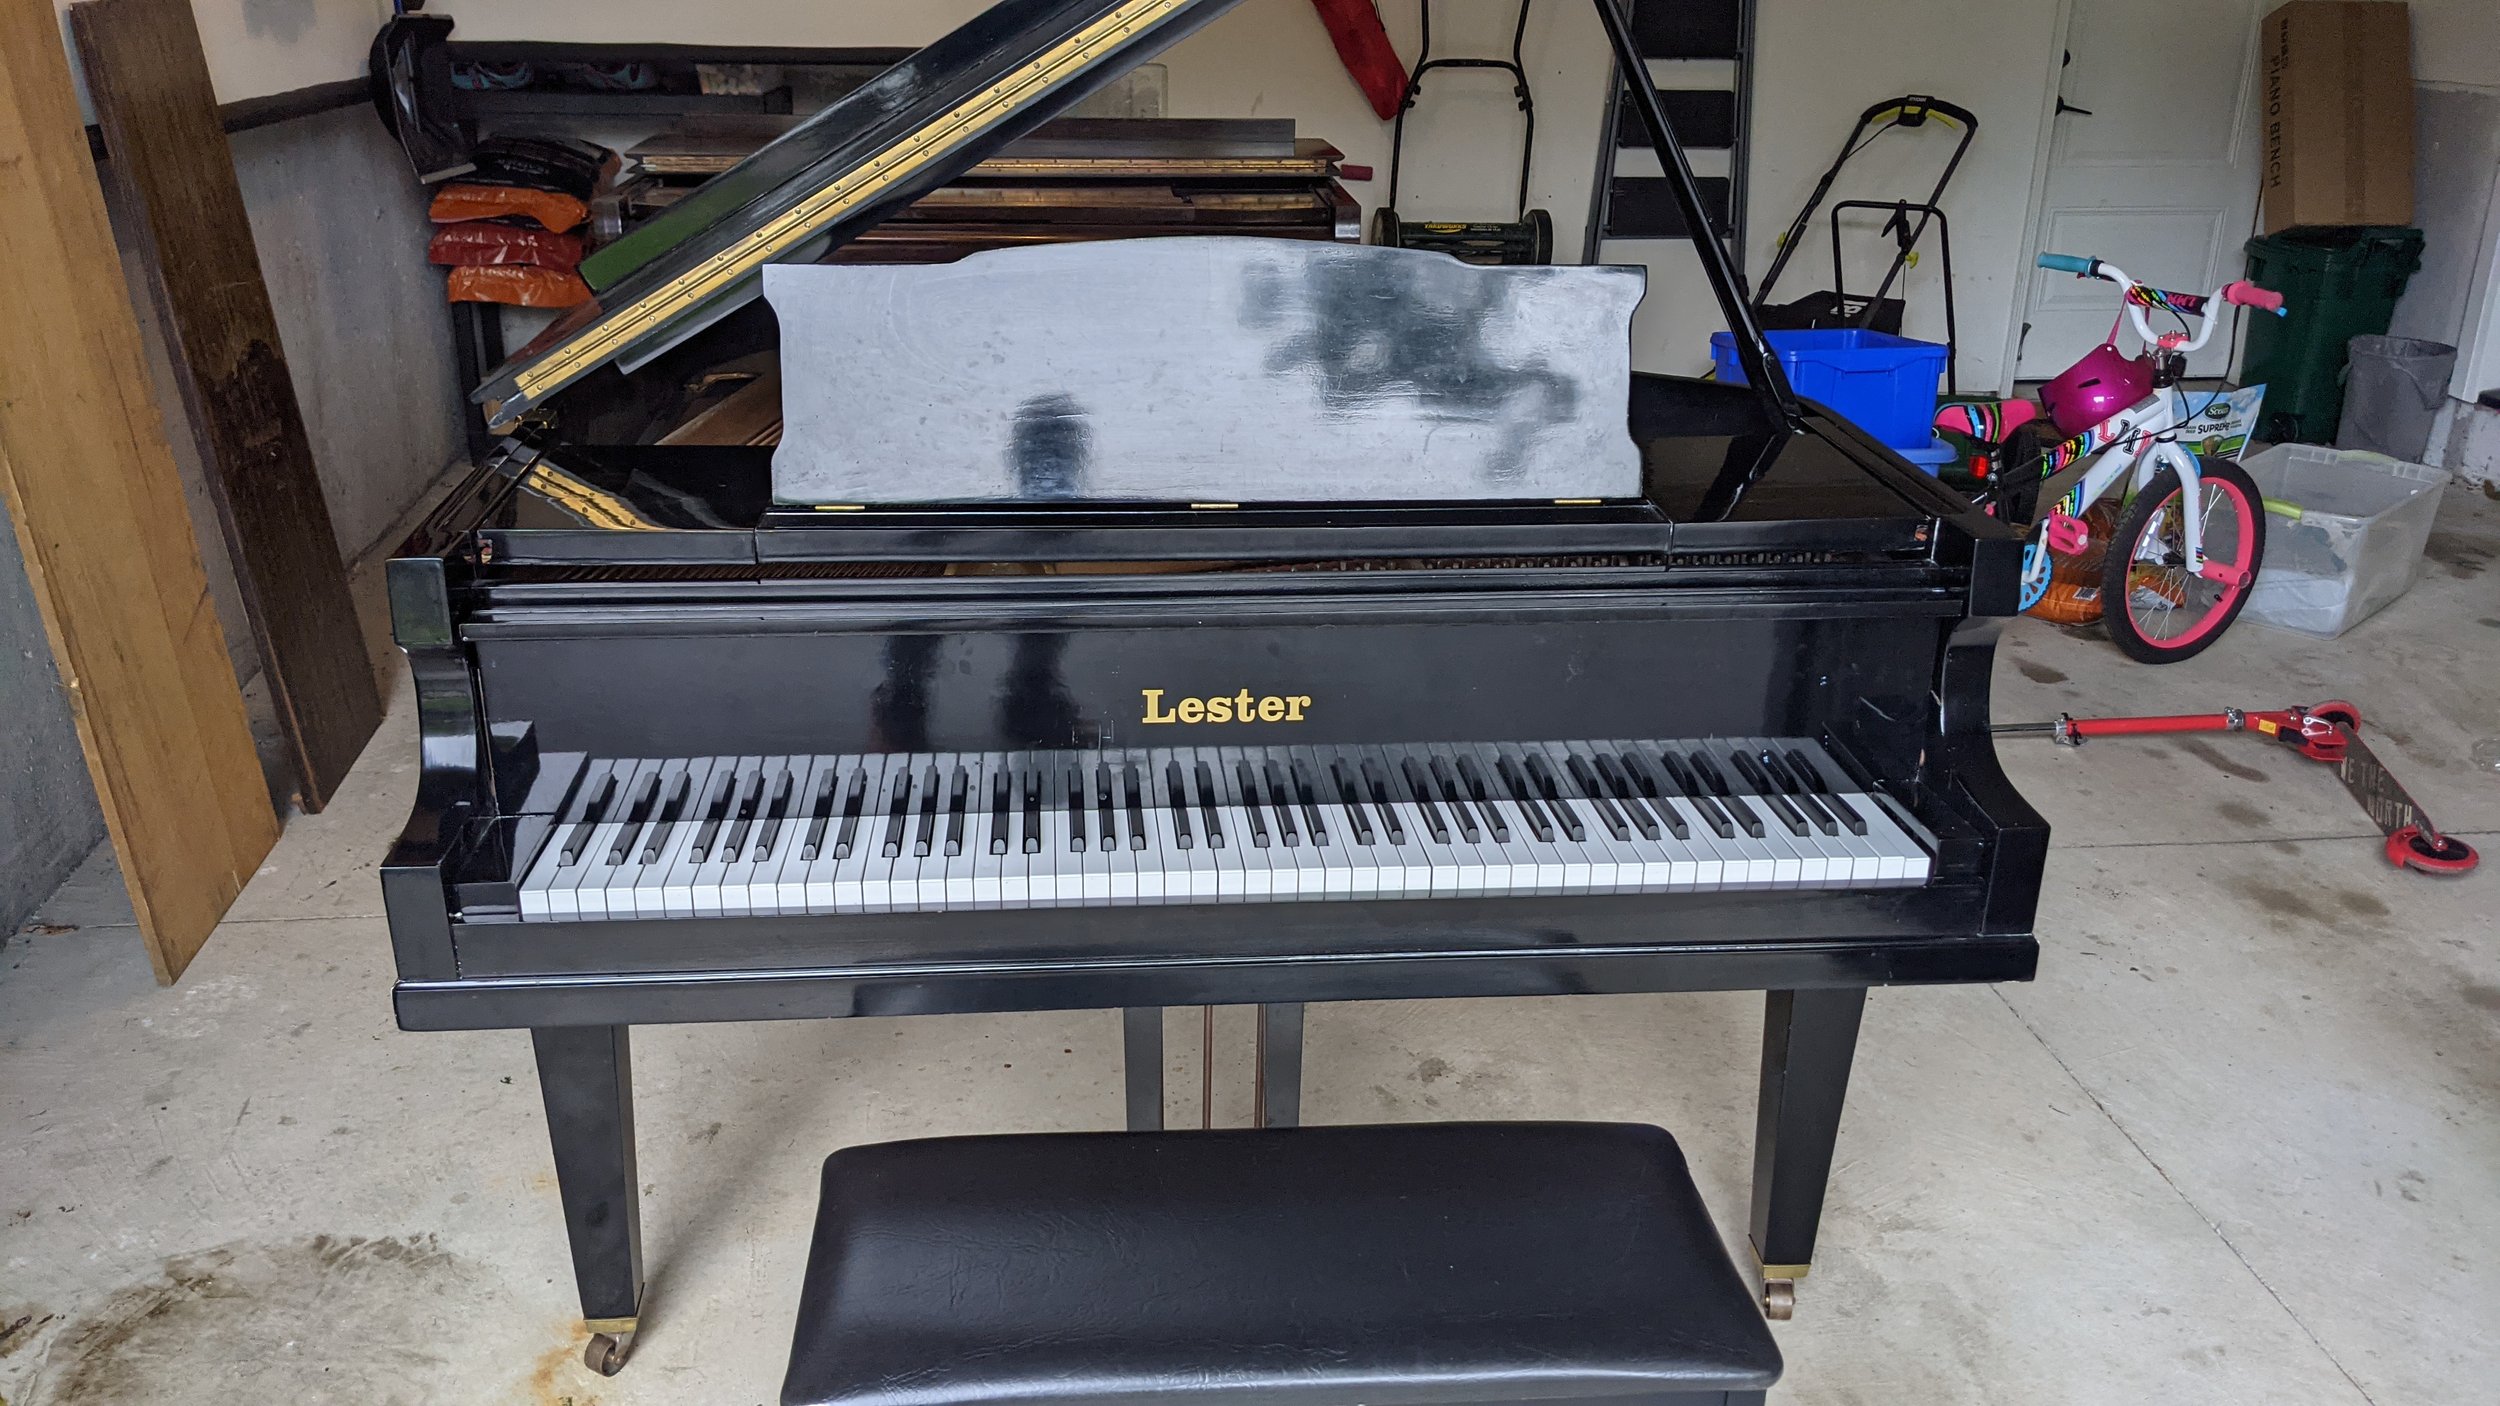 Lester baby grand piano for sale4.jpg